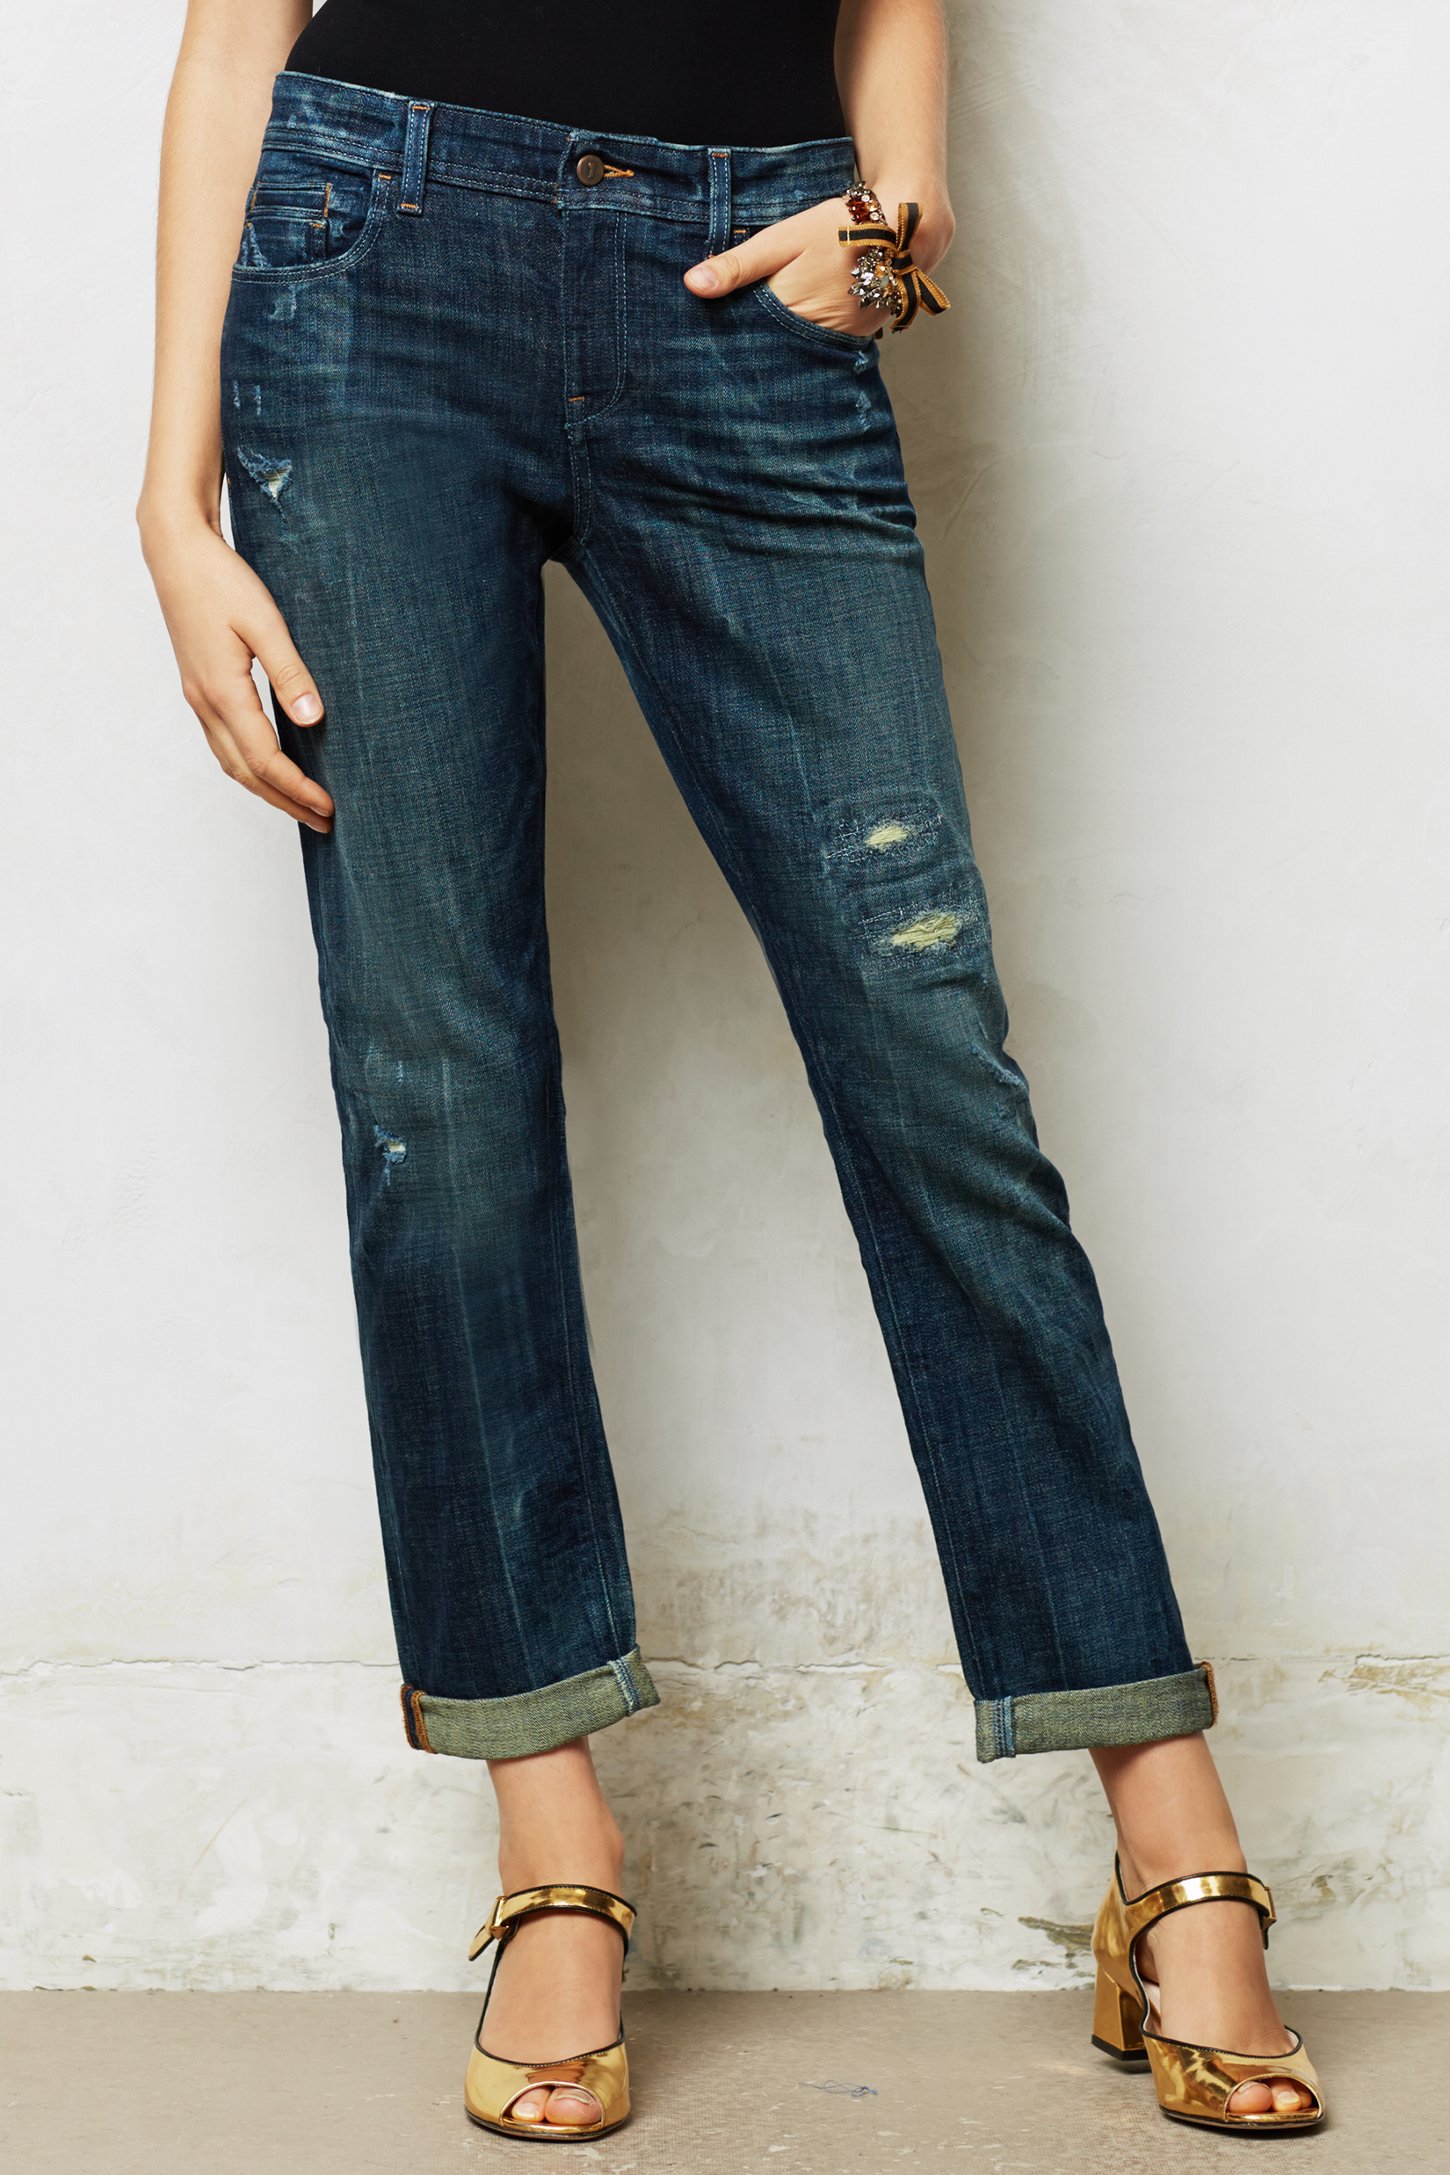 Lyst - Pilcro Hyphen Relaxed Distressed Jeans in Blue